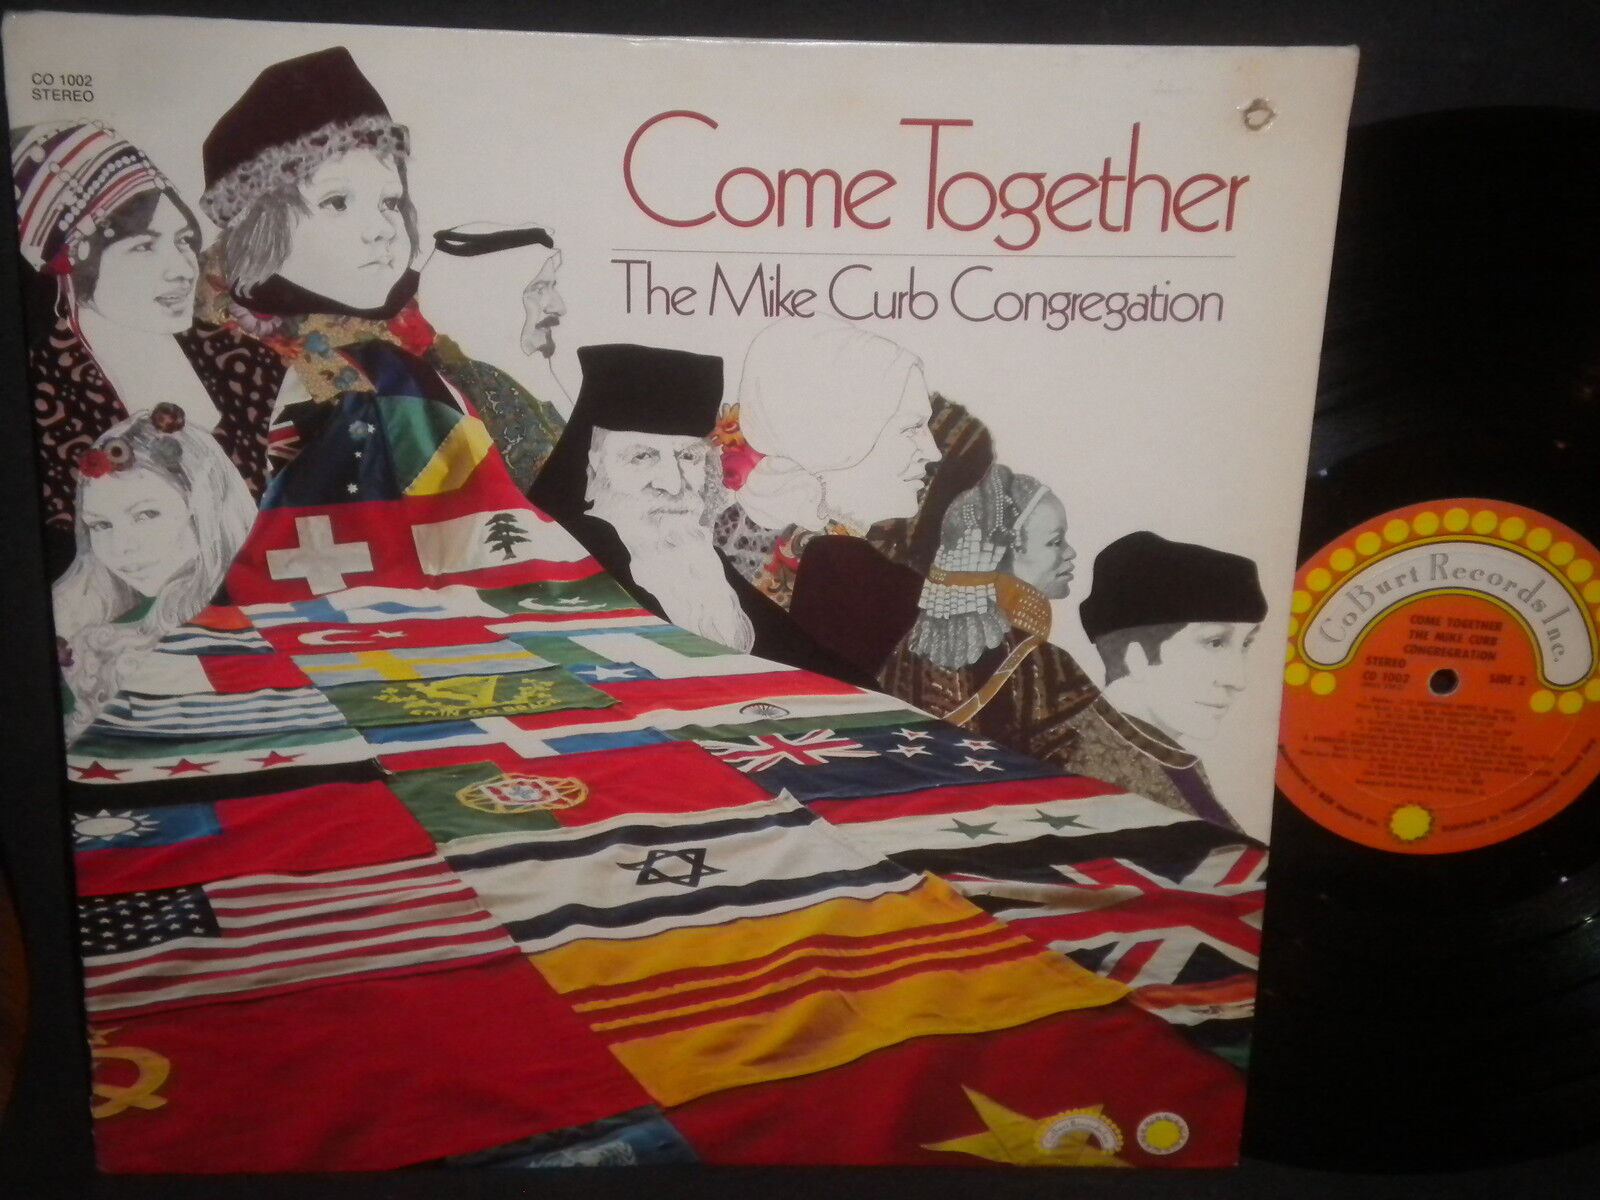 The Mike Curb Congregation "Come Together" LP